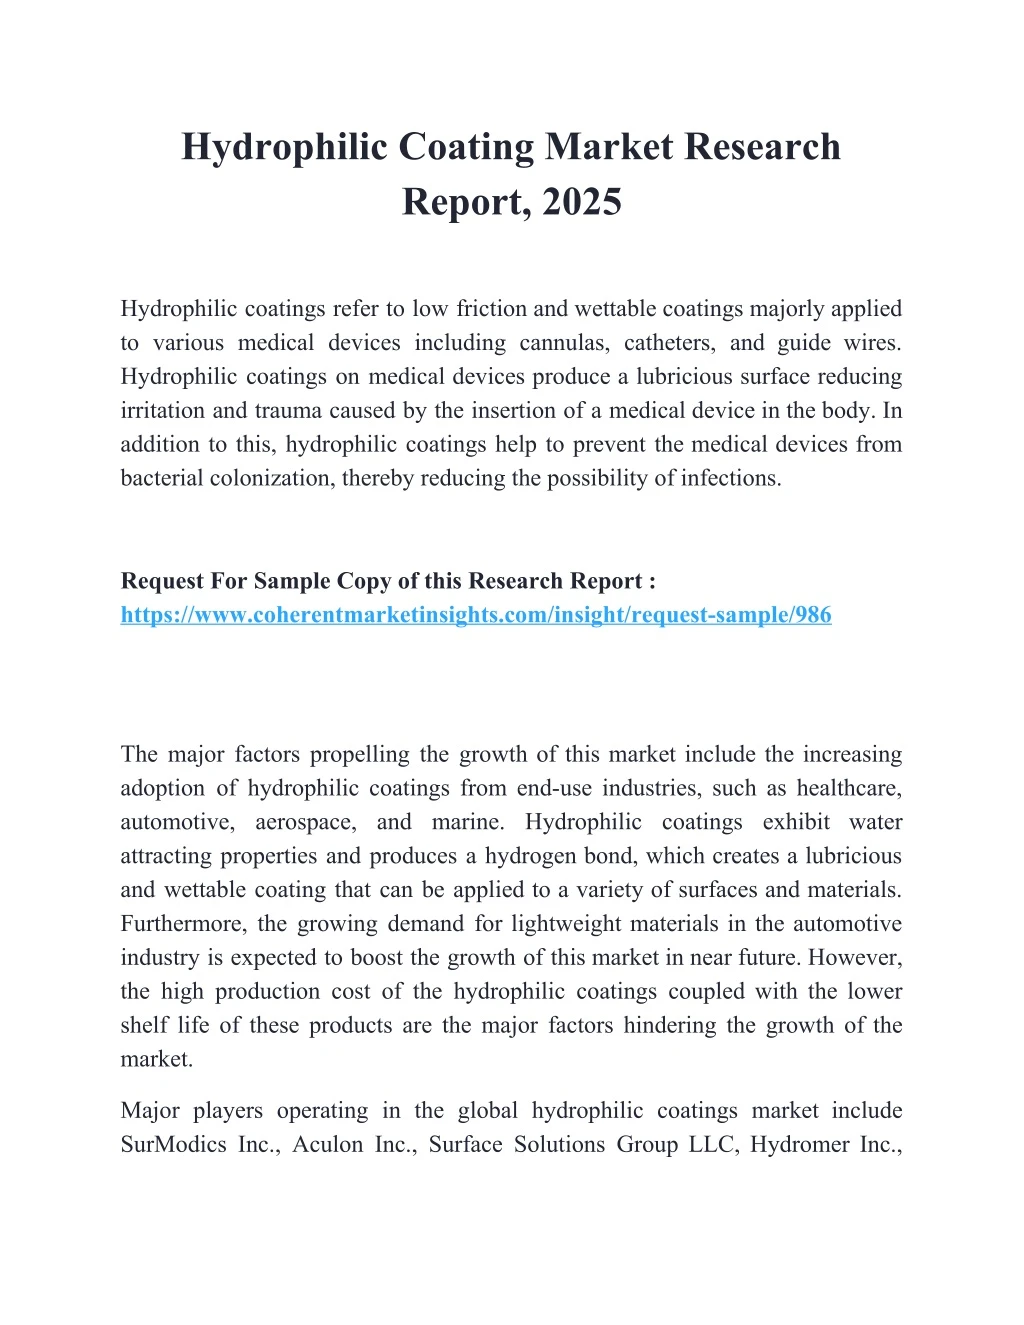 hydrophilic coating market research report 2025